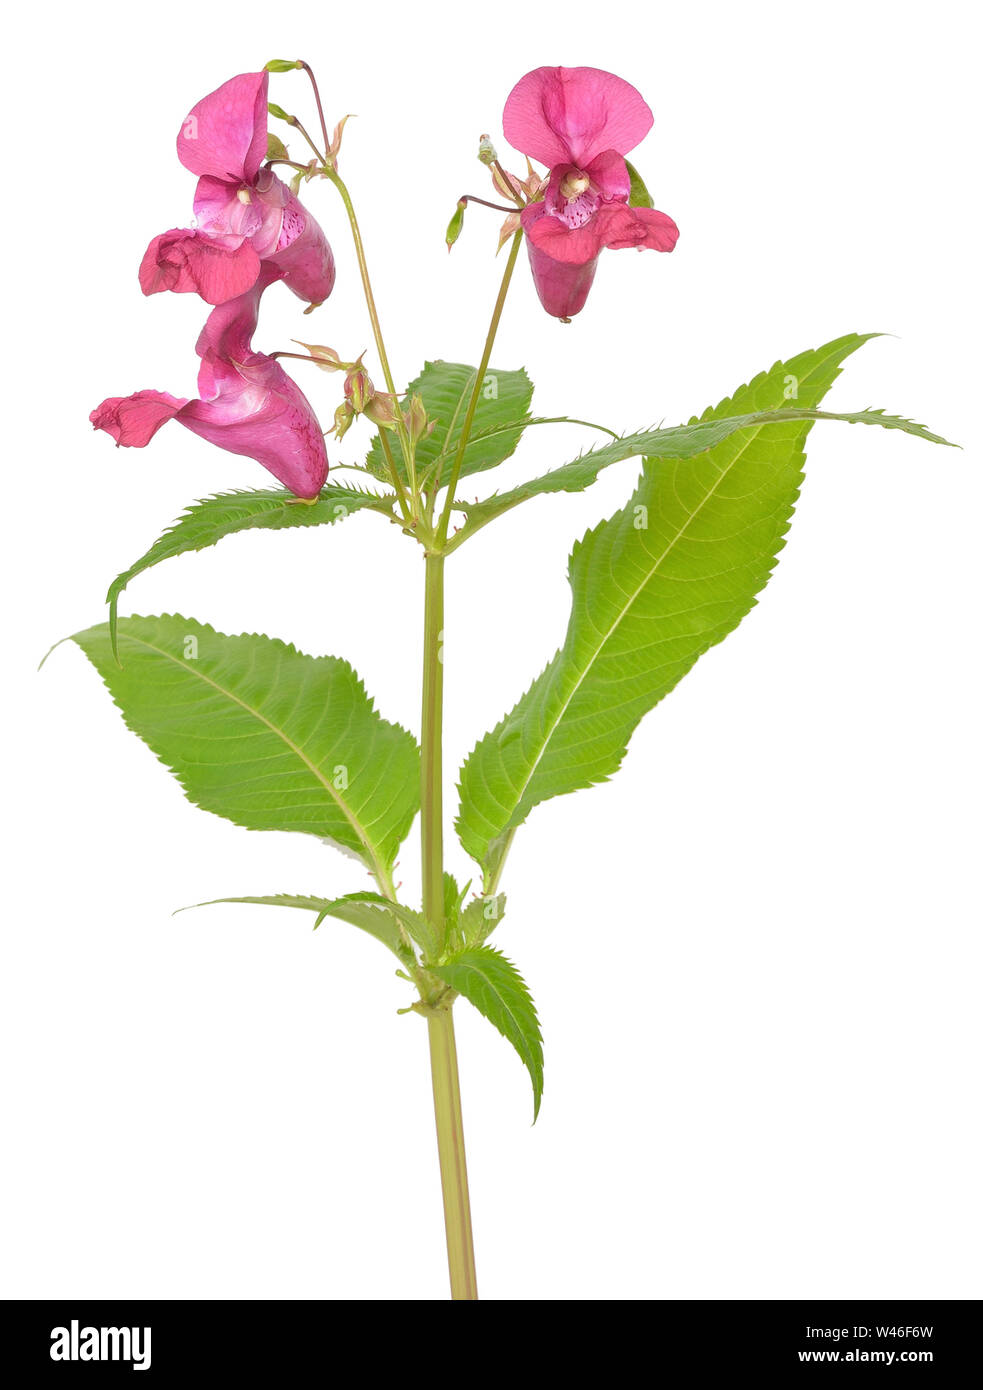 Impatiens glandulifera flower isolated on white background Banque D'Images